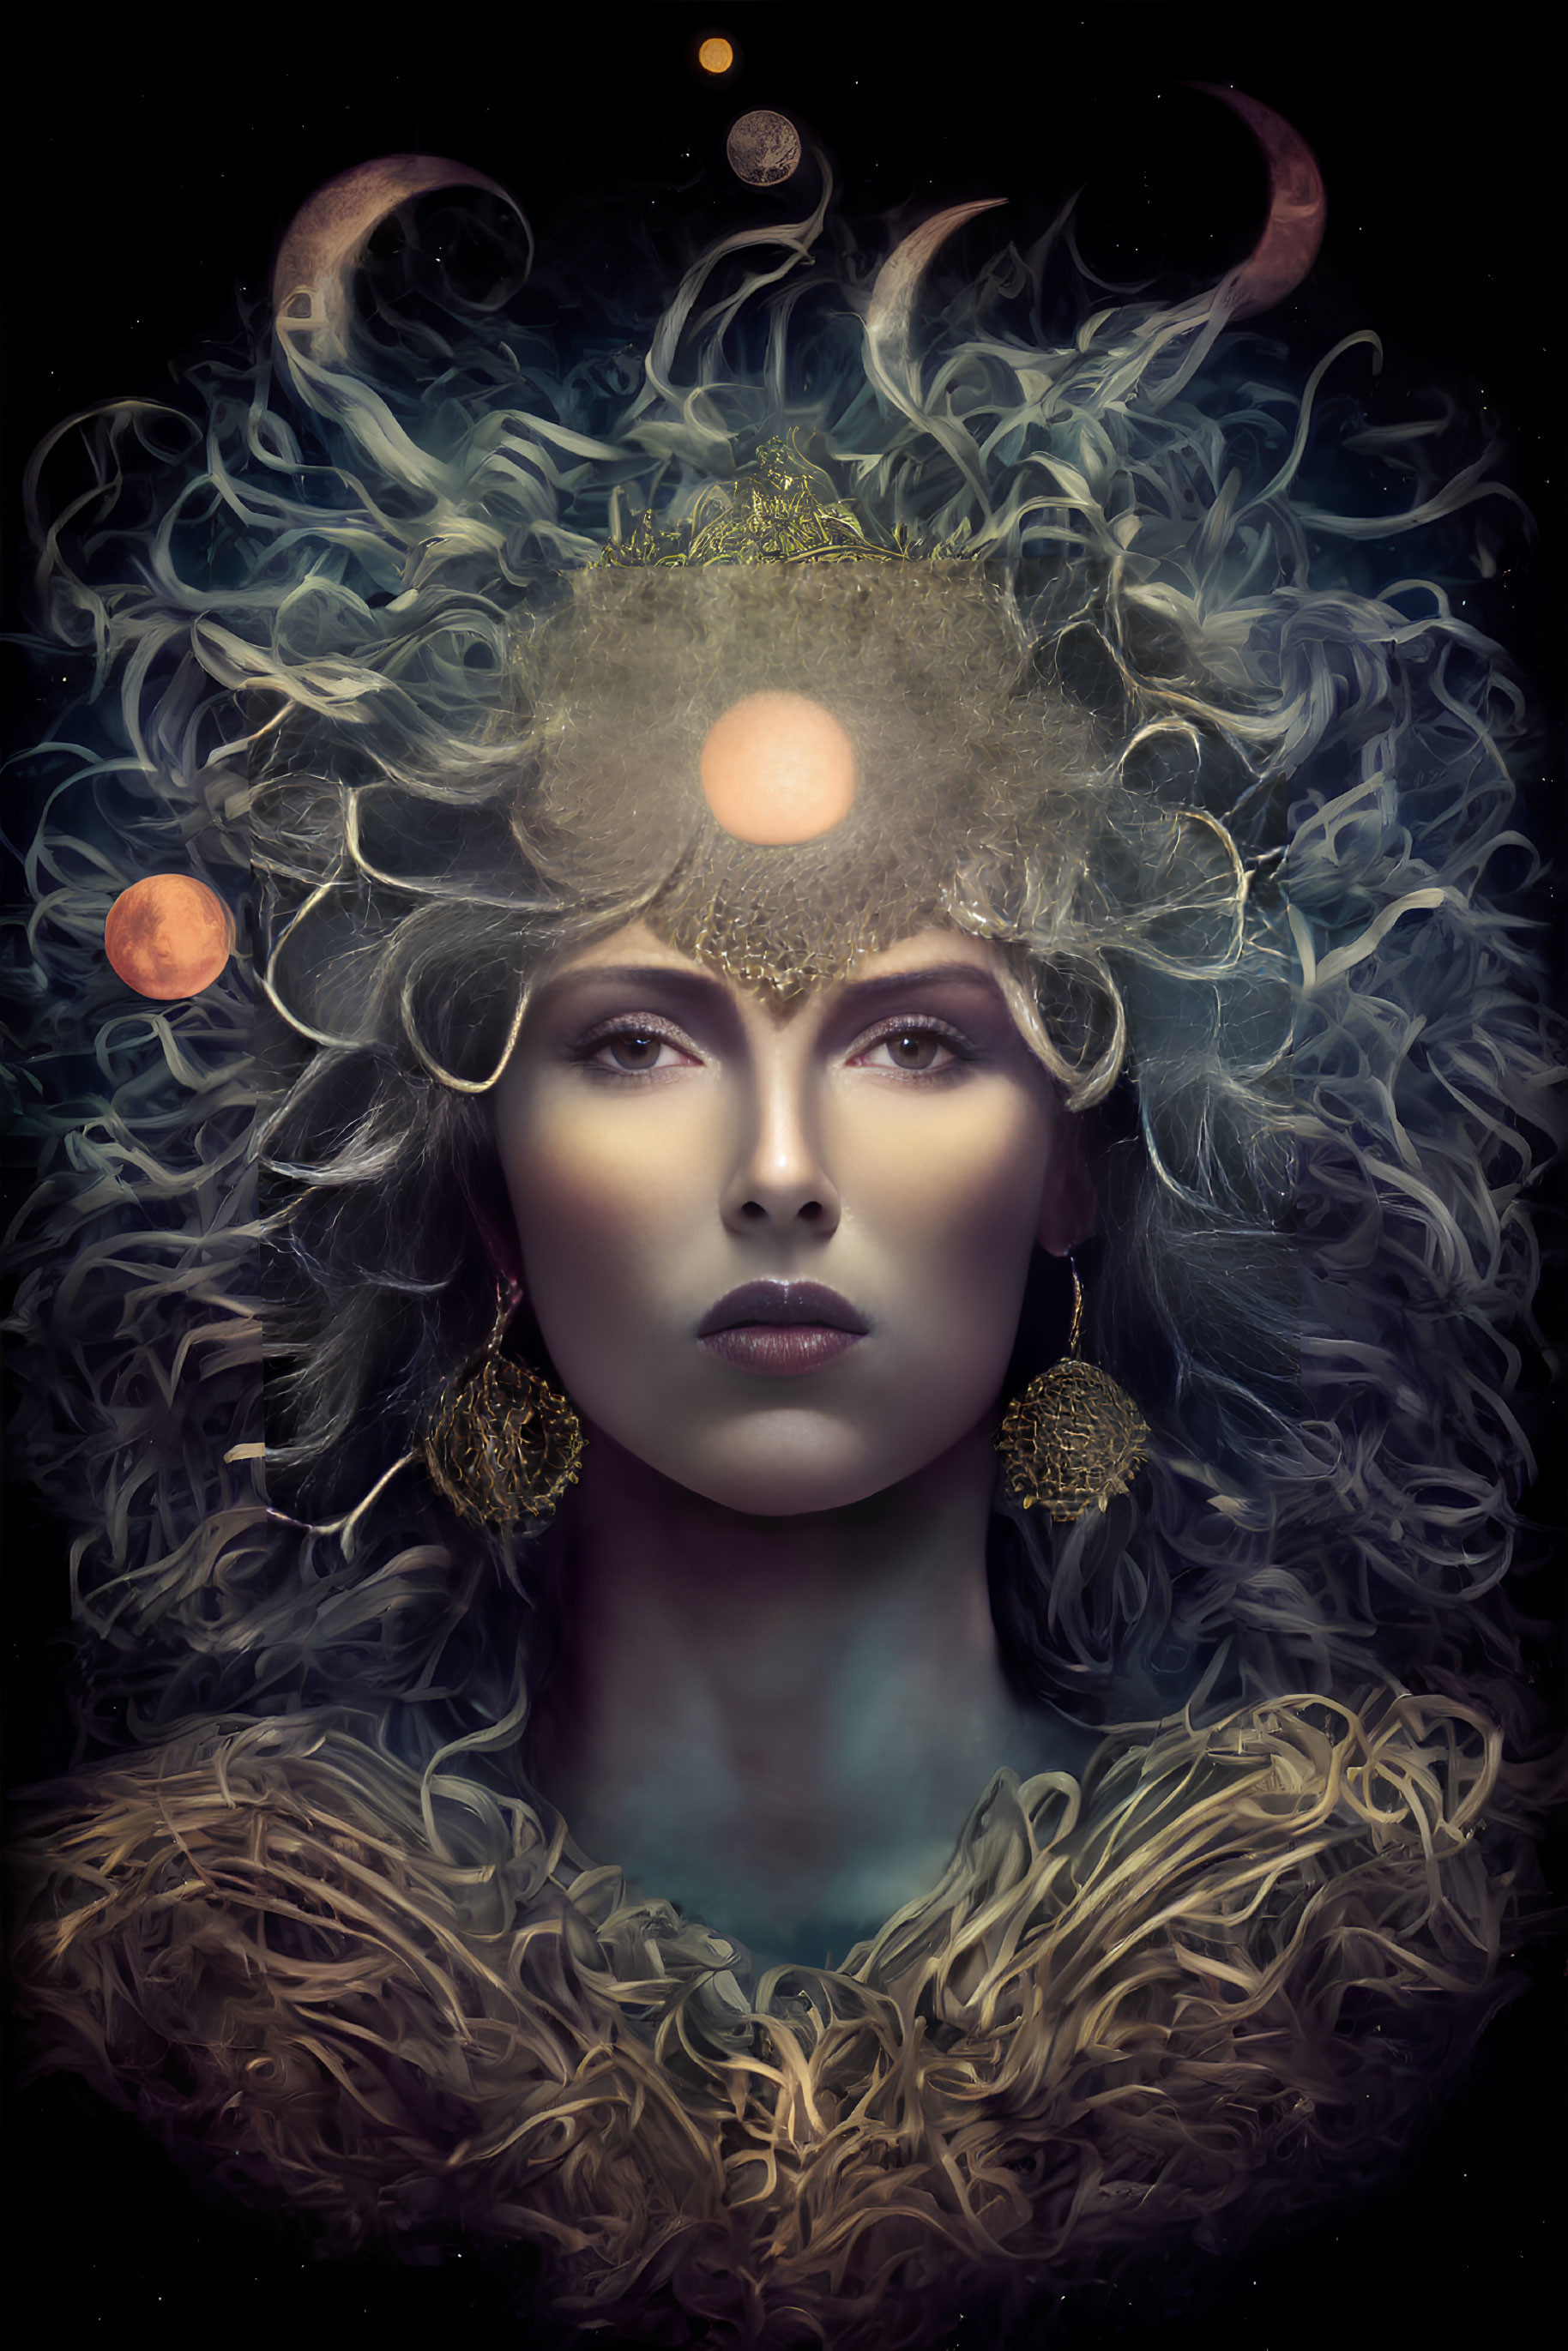 Celestial surreal portrait of a woman with horns and planets